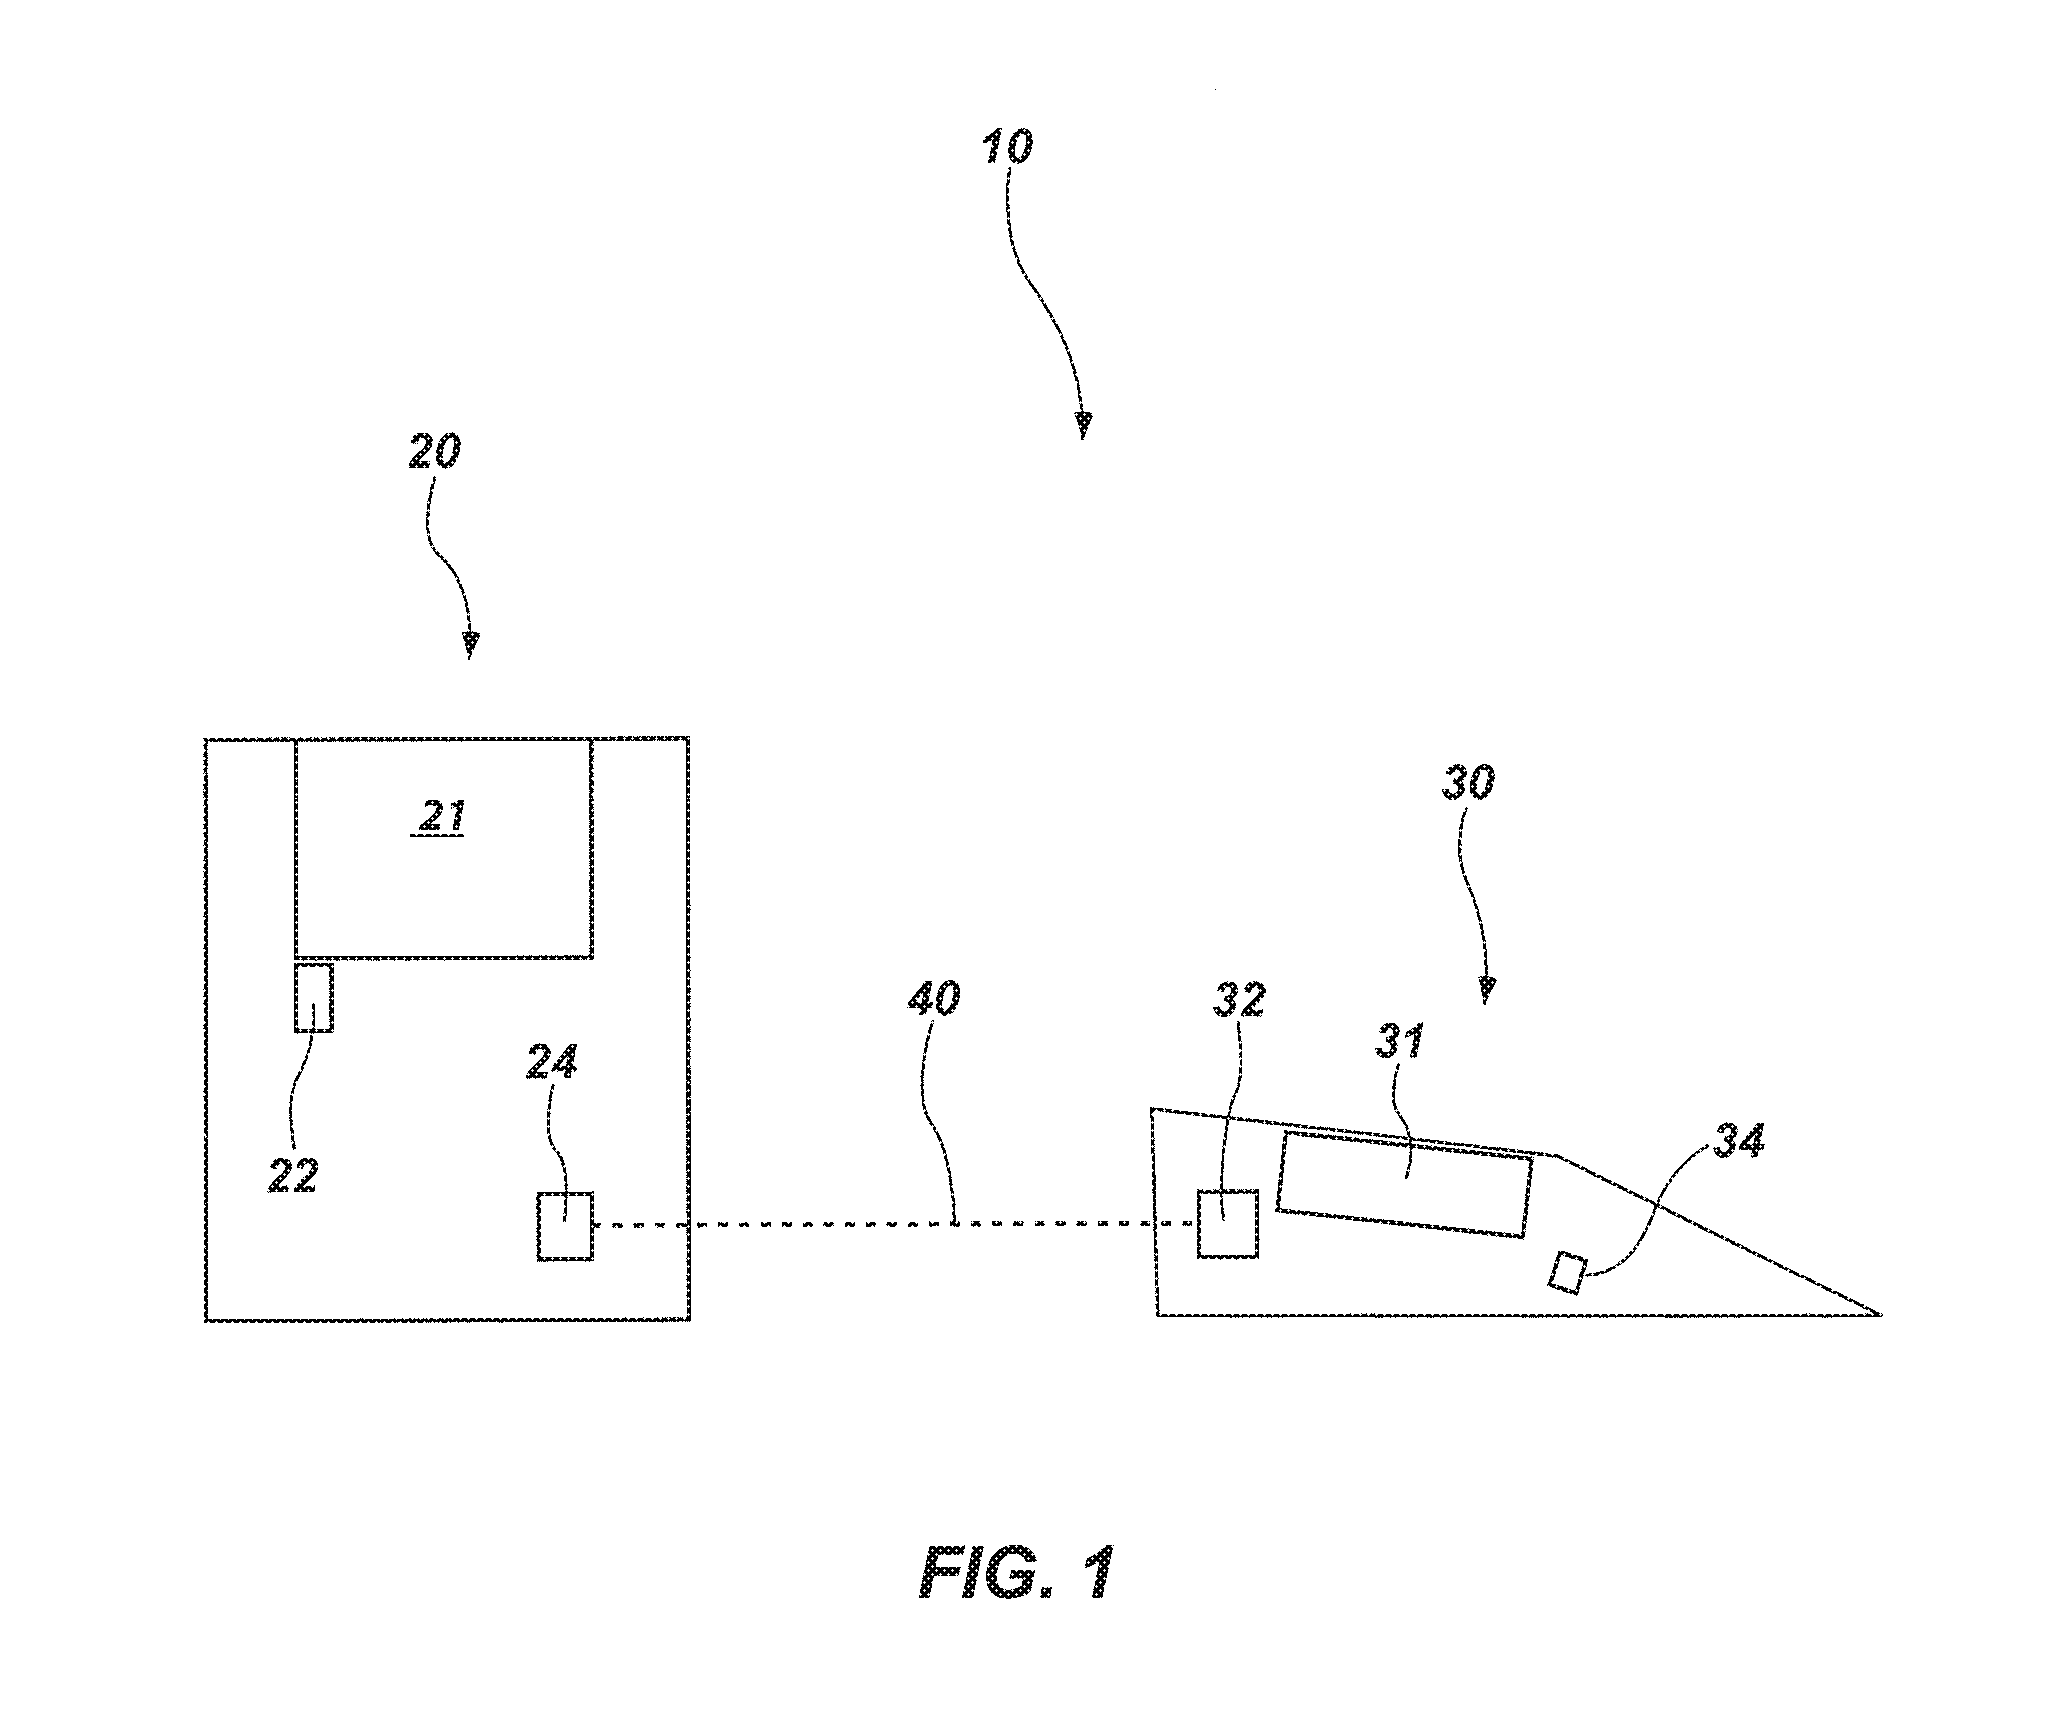 Playing card handling devices, systems, and methods for verifying sets of cards